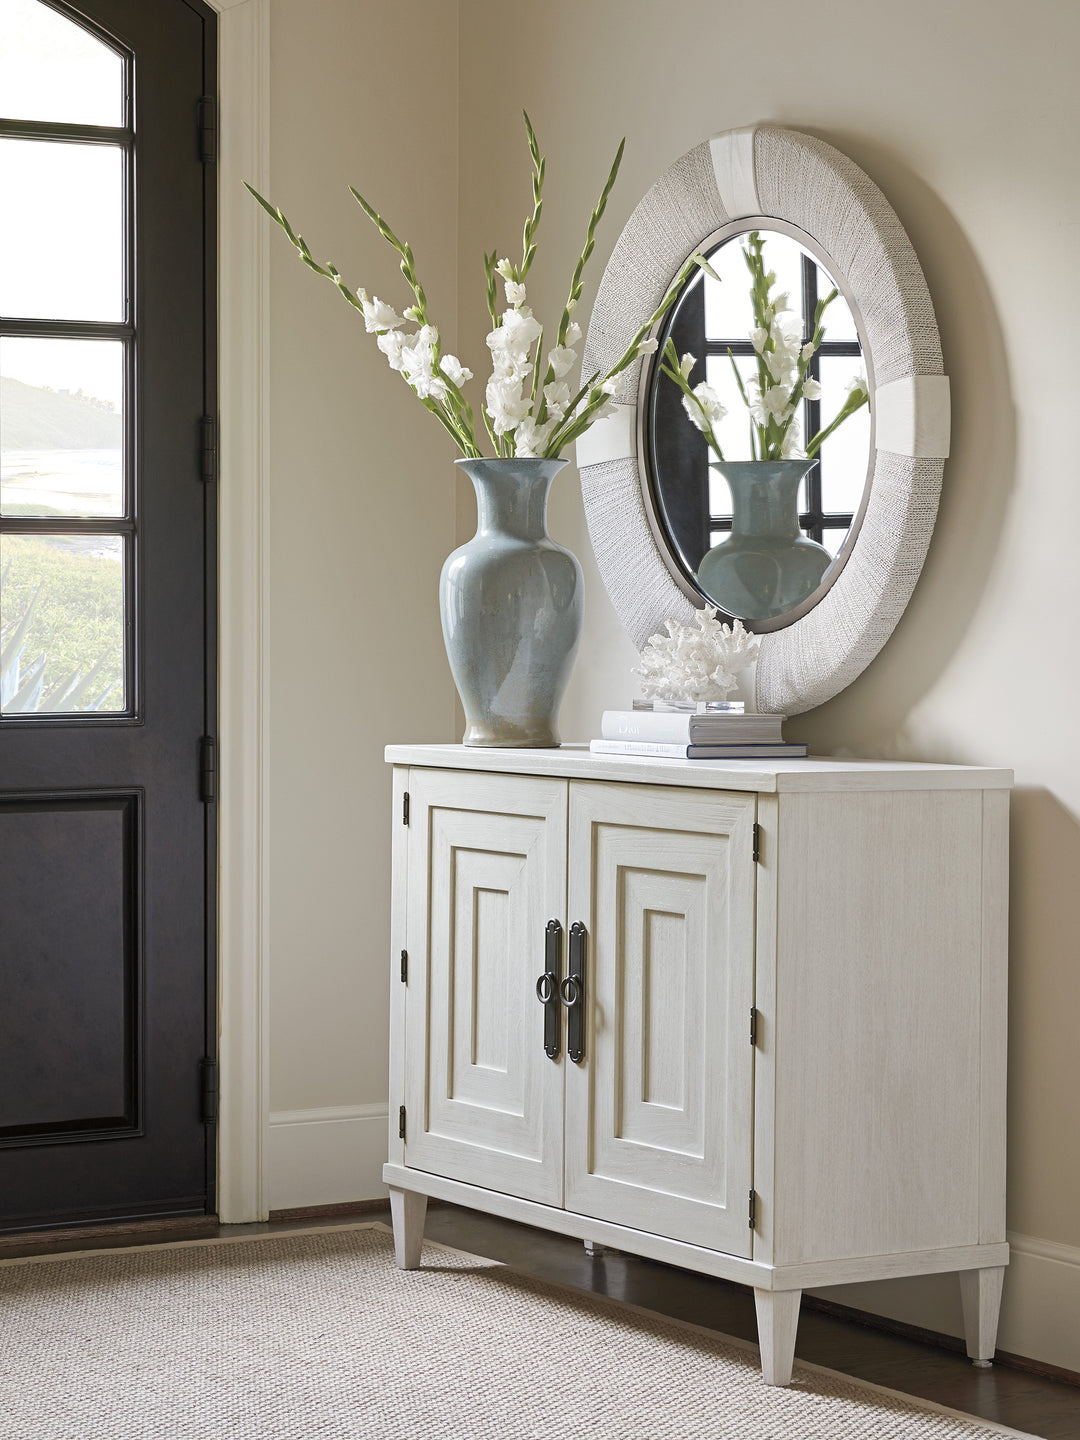 American Home Furniture | Tommy Bahama Home  - Ocean Breeze Seacroft Round Mirror